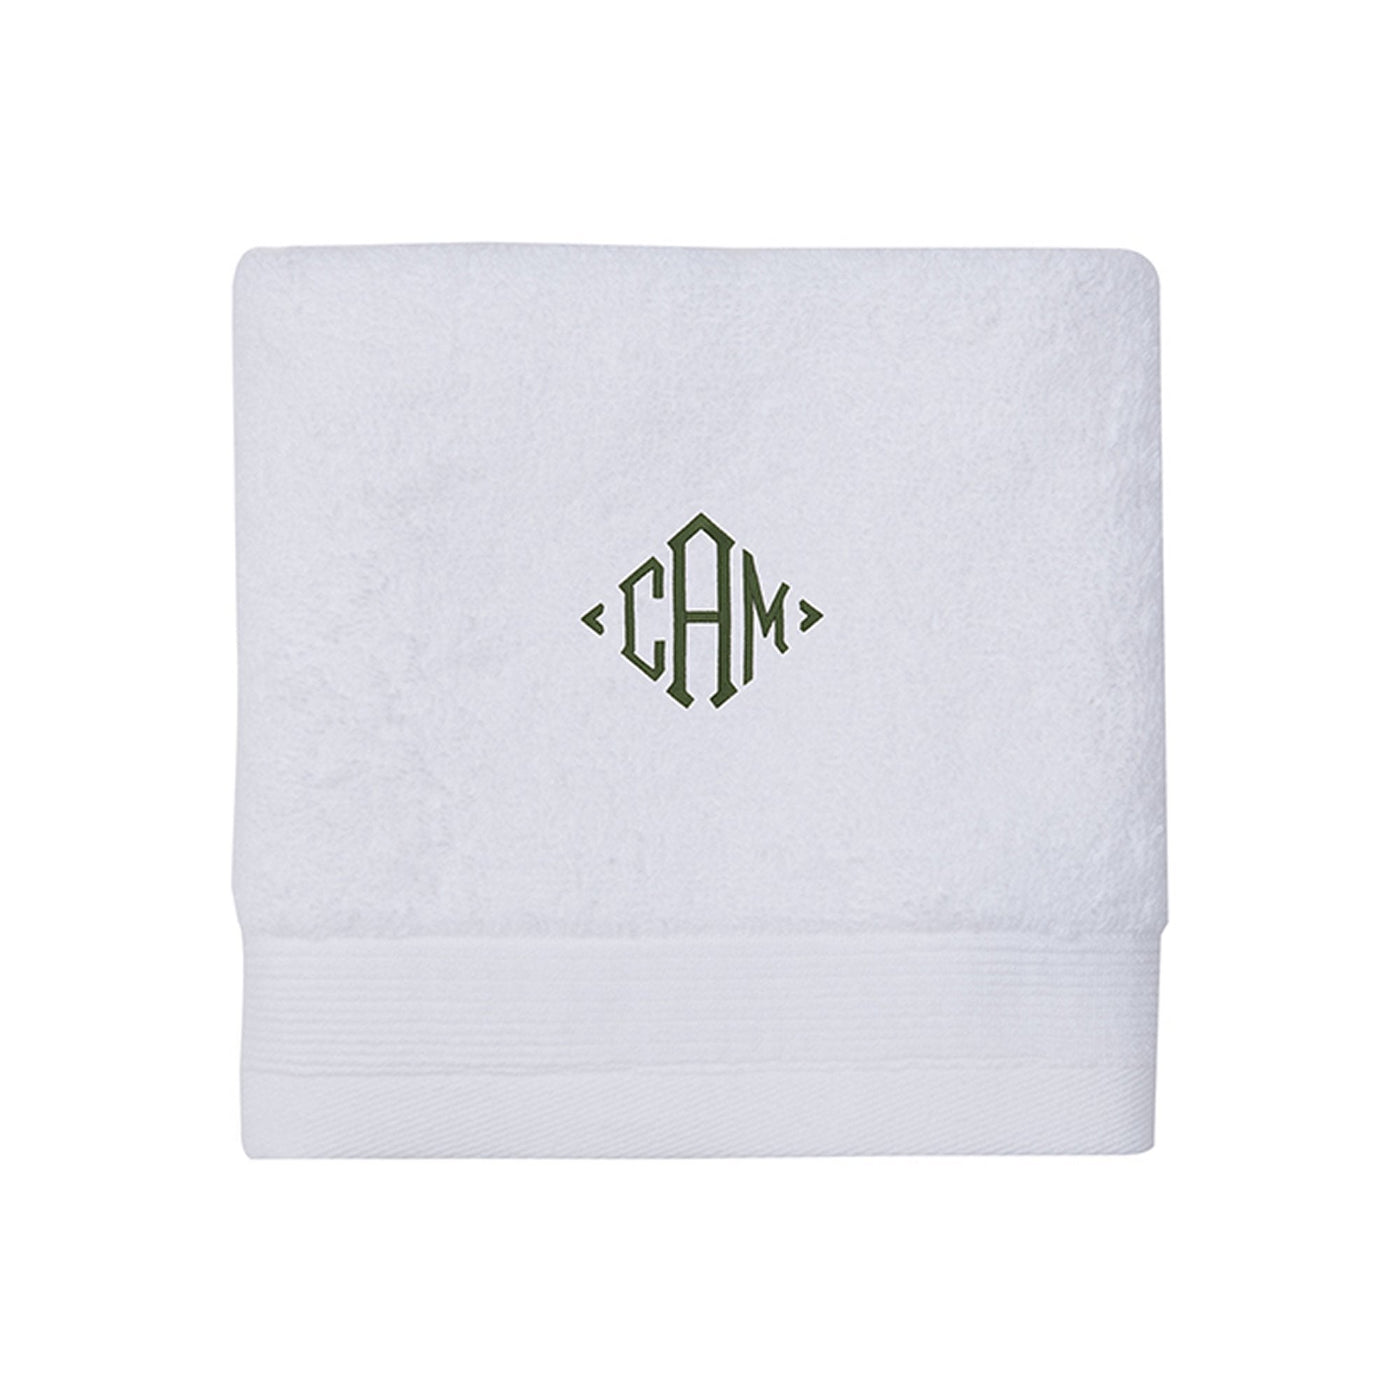 James Bond Inspired Embroidered Como 700gsm Towel Collection